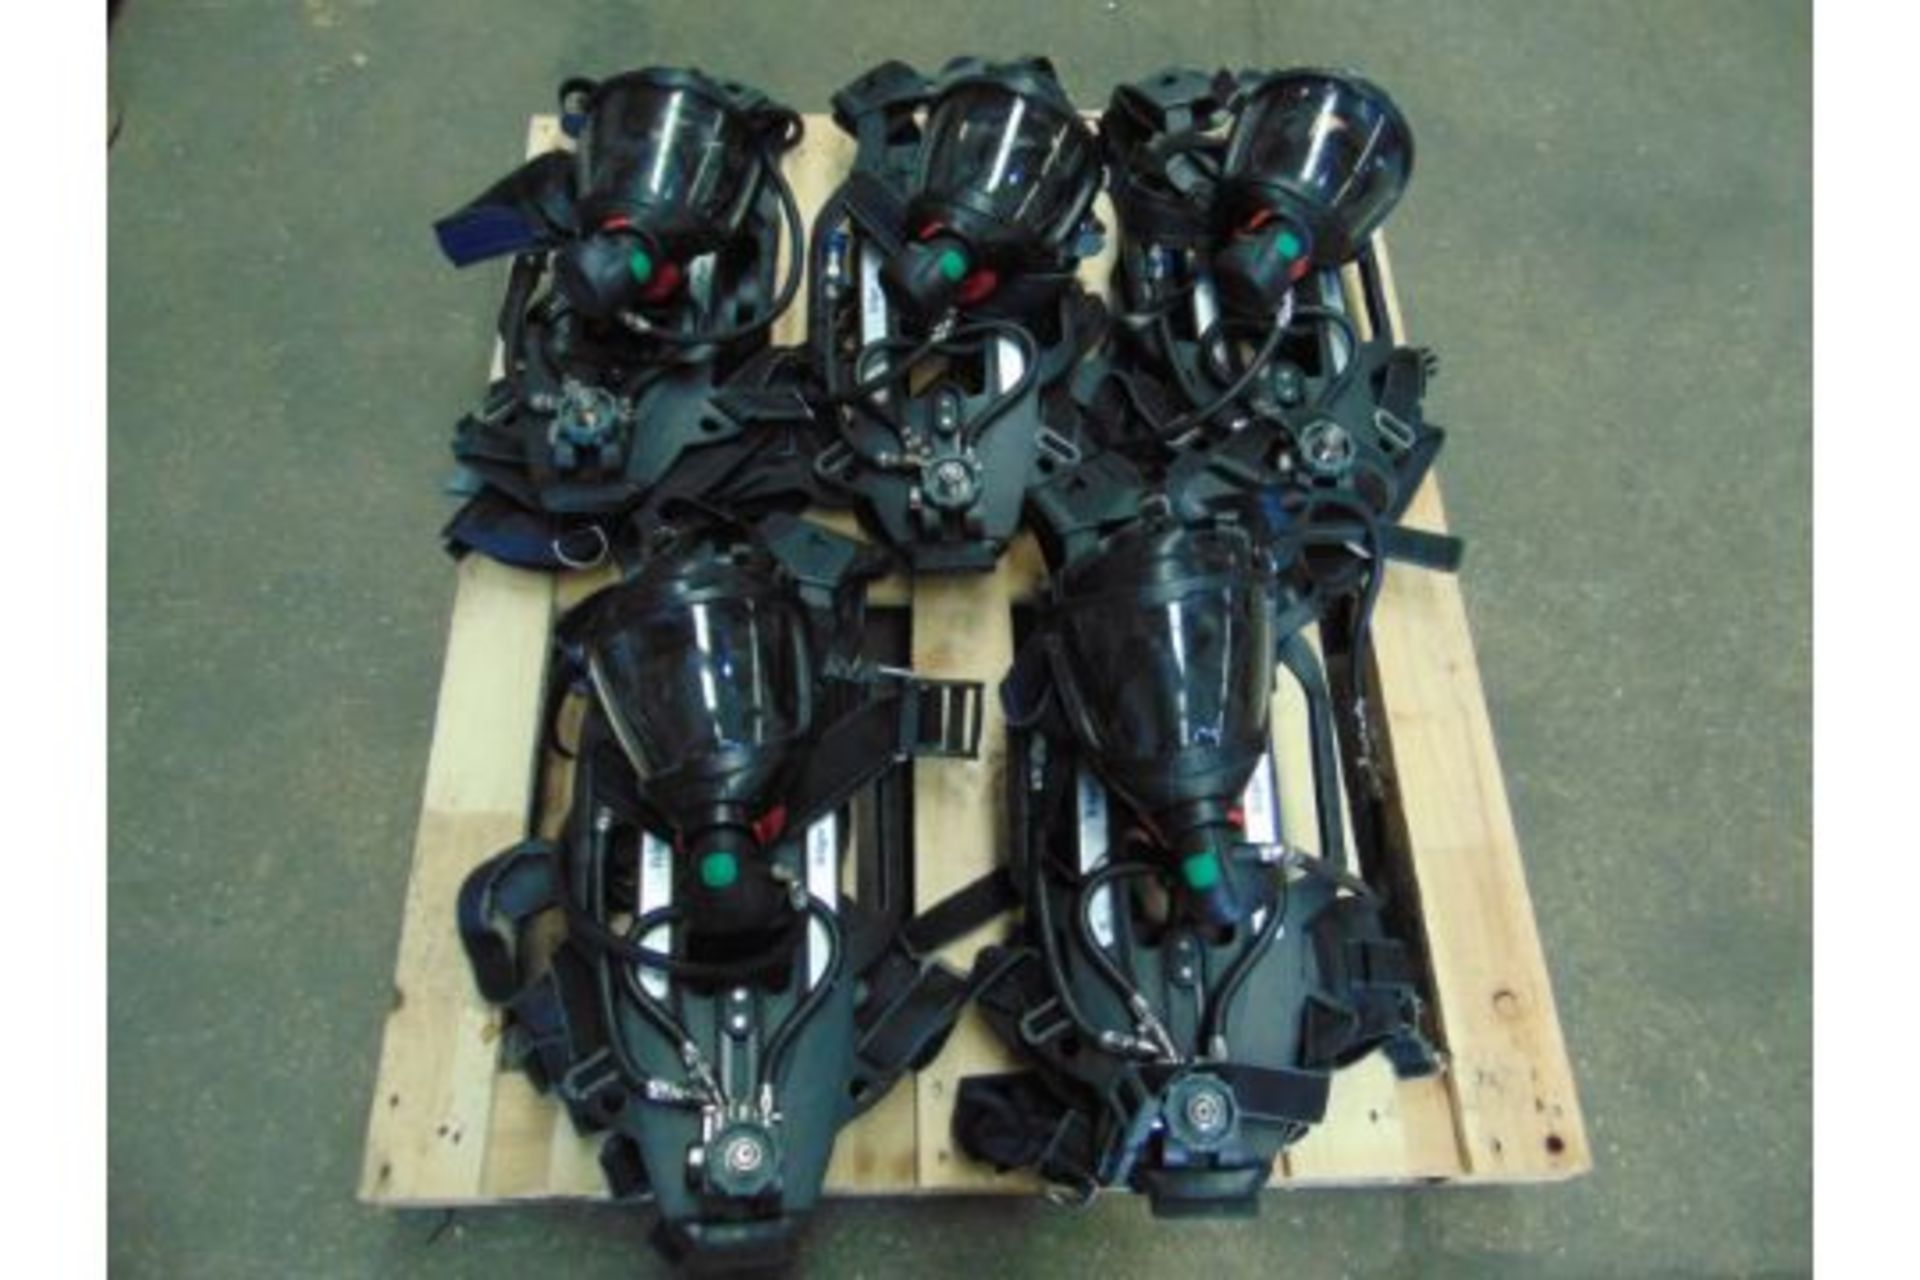 5 x Drager PSS 7000 Self Contained Breathing Apparatus w/ 10 x Drager 300 Bar Air Cylinders - Image 6 of 20